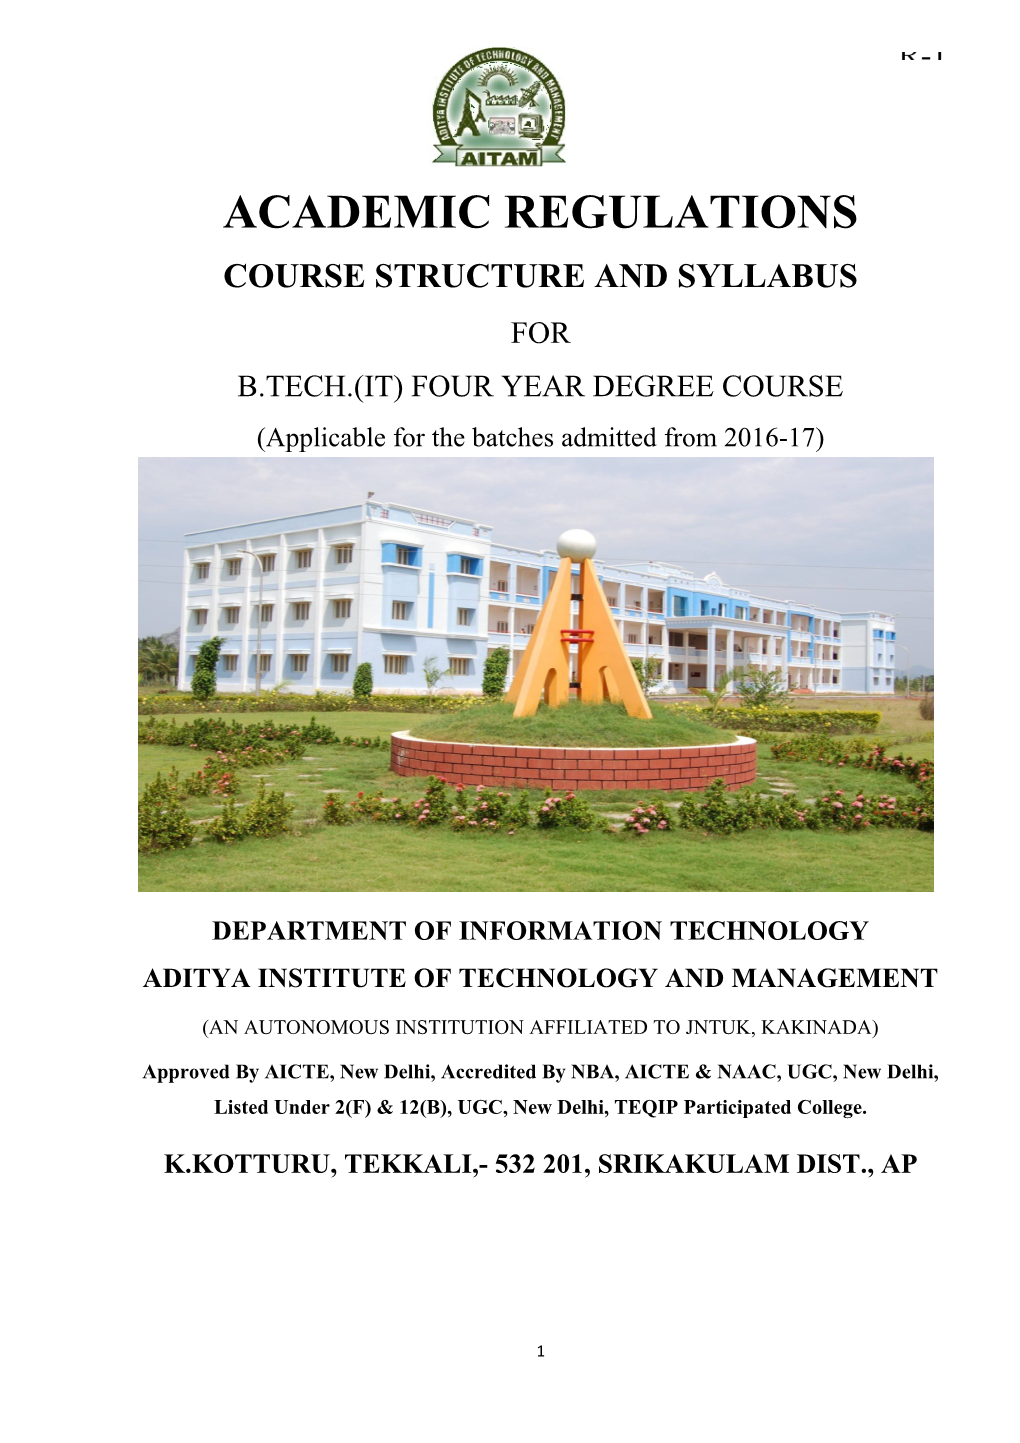 Course Structure and Syllabus s1